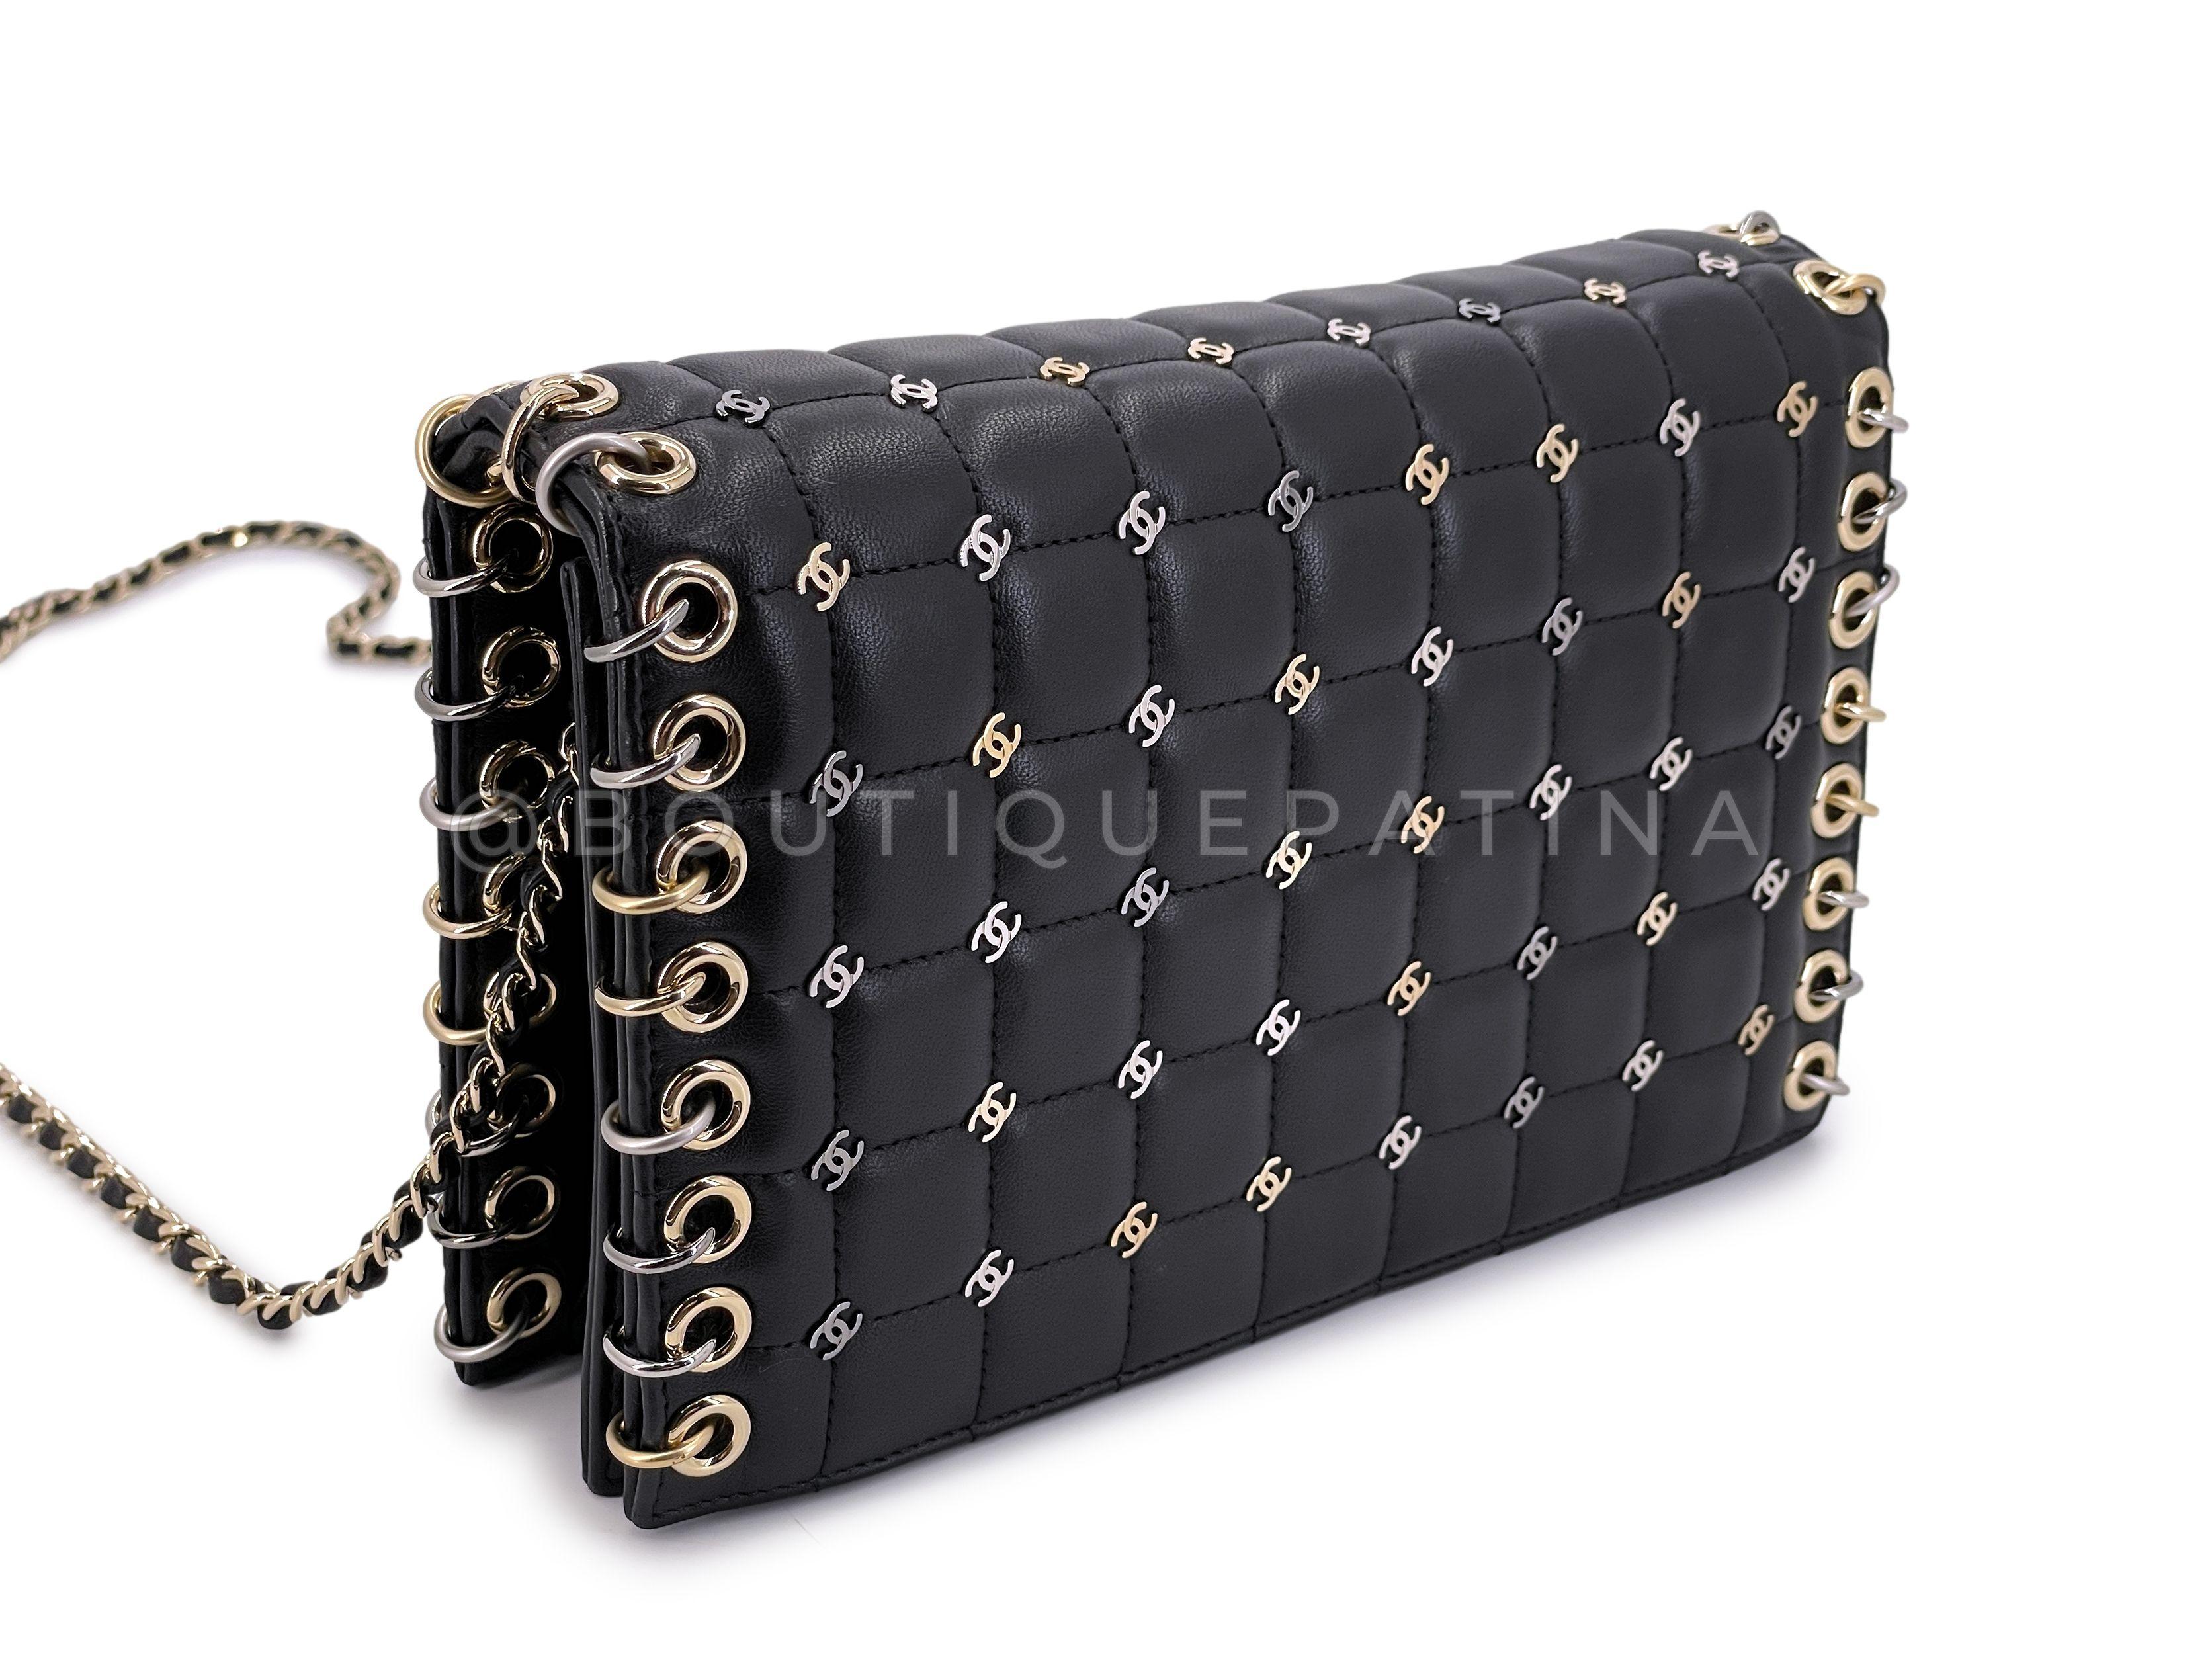 Pristine Chanel 16B Punk CC-Studded Piercing Clutch on Chain Bag Black 67544 In Excellent Condition For Sale In Costa Mesa, CA